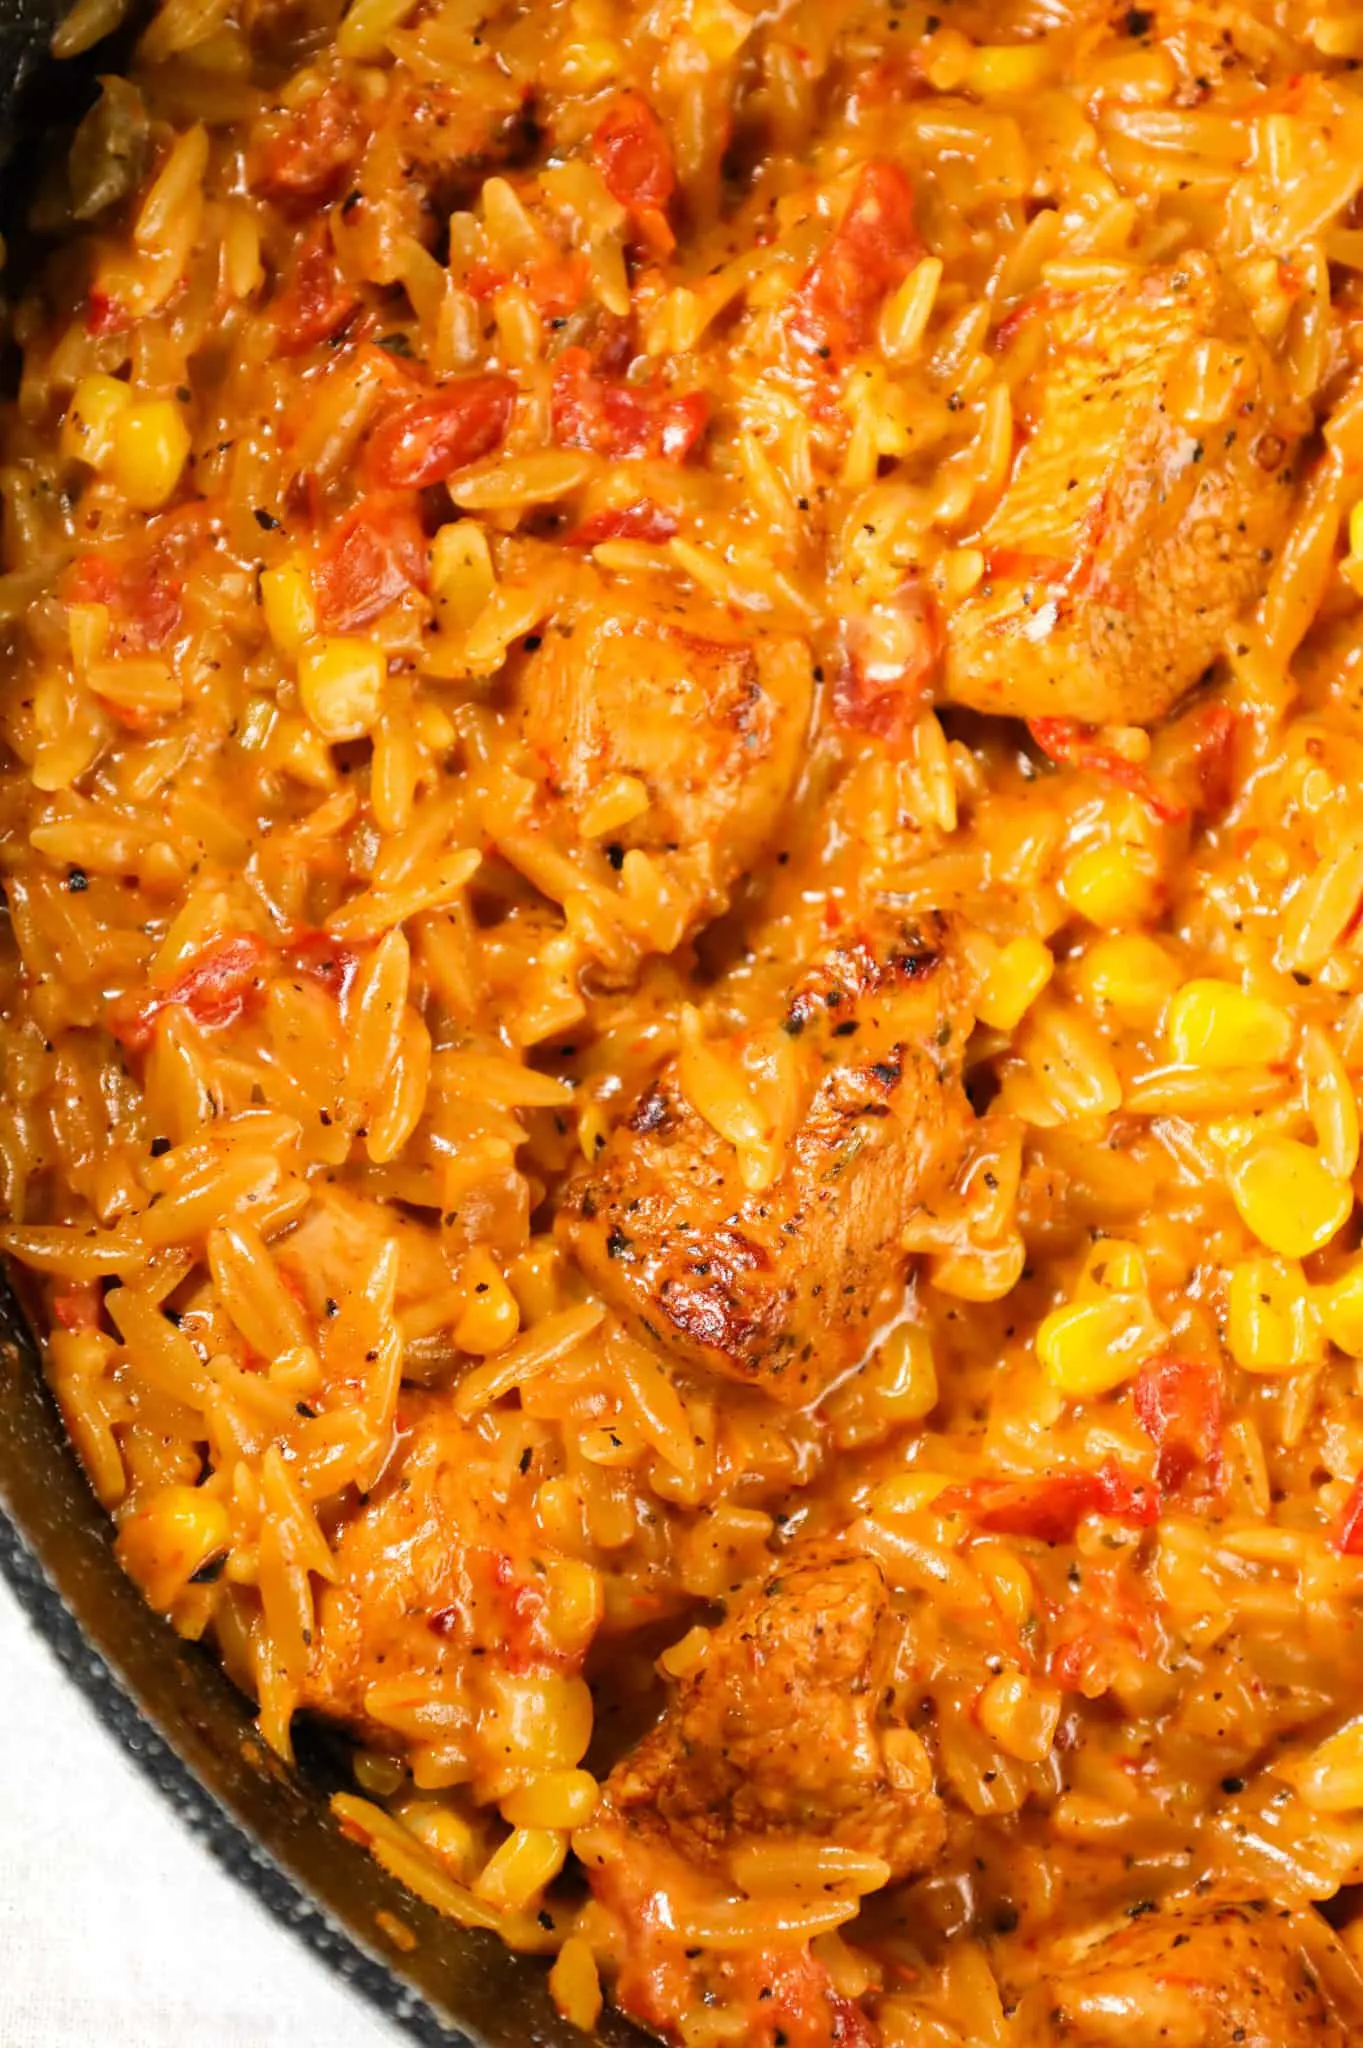 Cajun Chicken Orzo is a delicious one pot dinner recipe loaded with chicken breast chunks, corn, Rotel diced tomatoes and orzo pasta all in a creamy Cajun sauce.